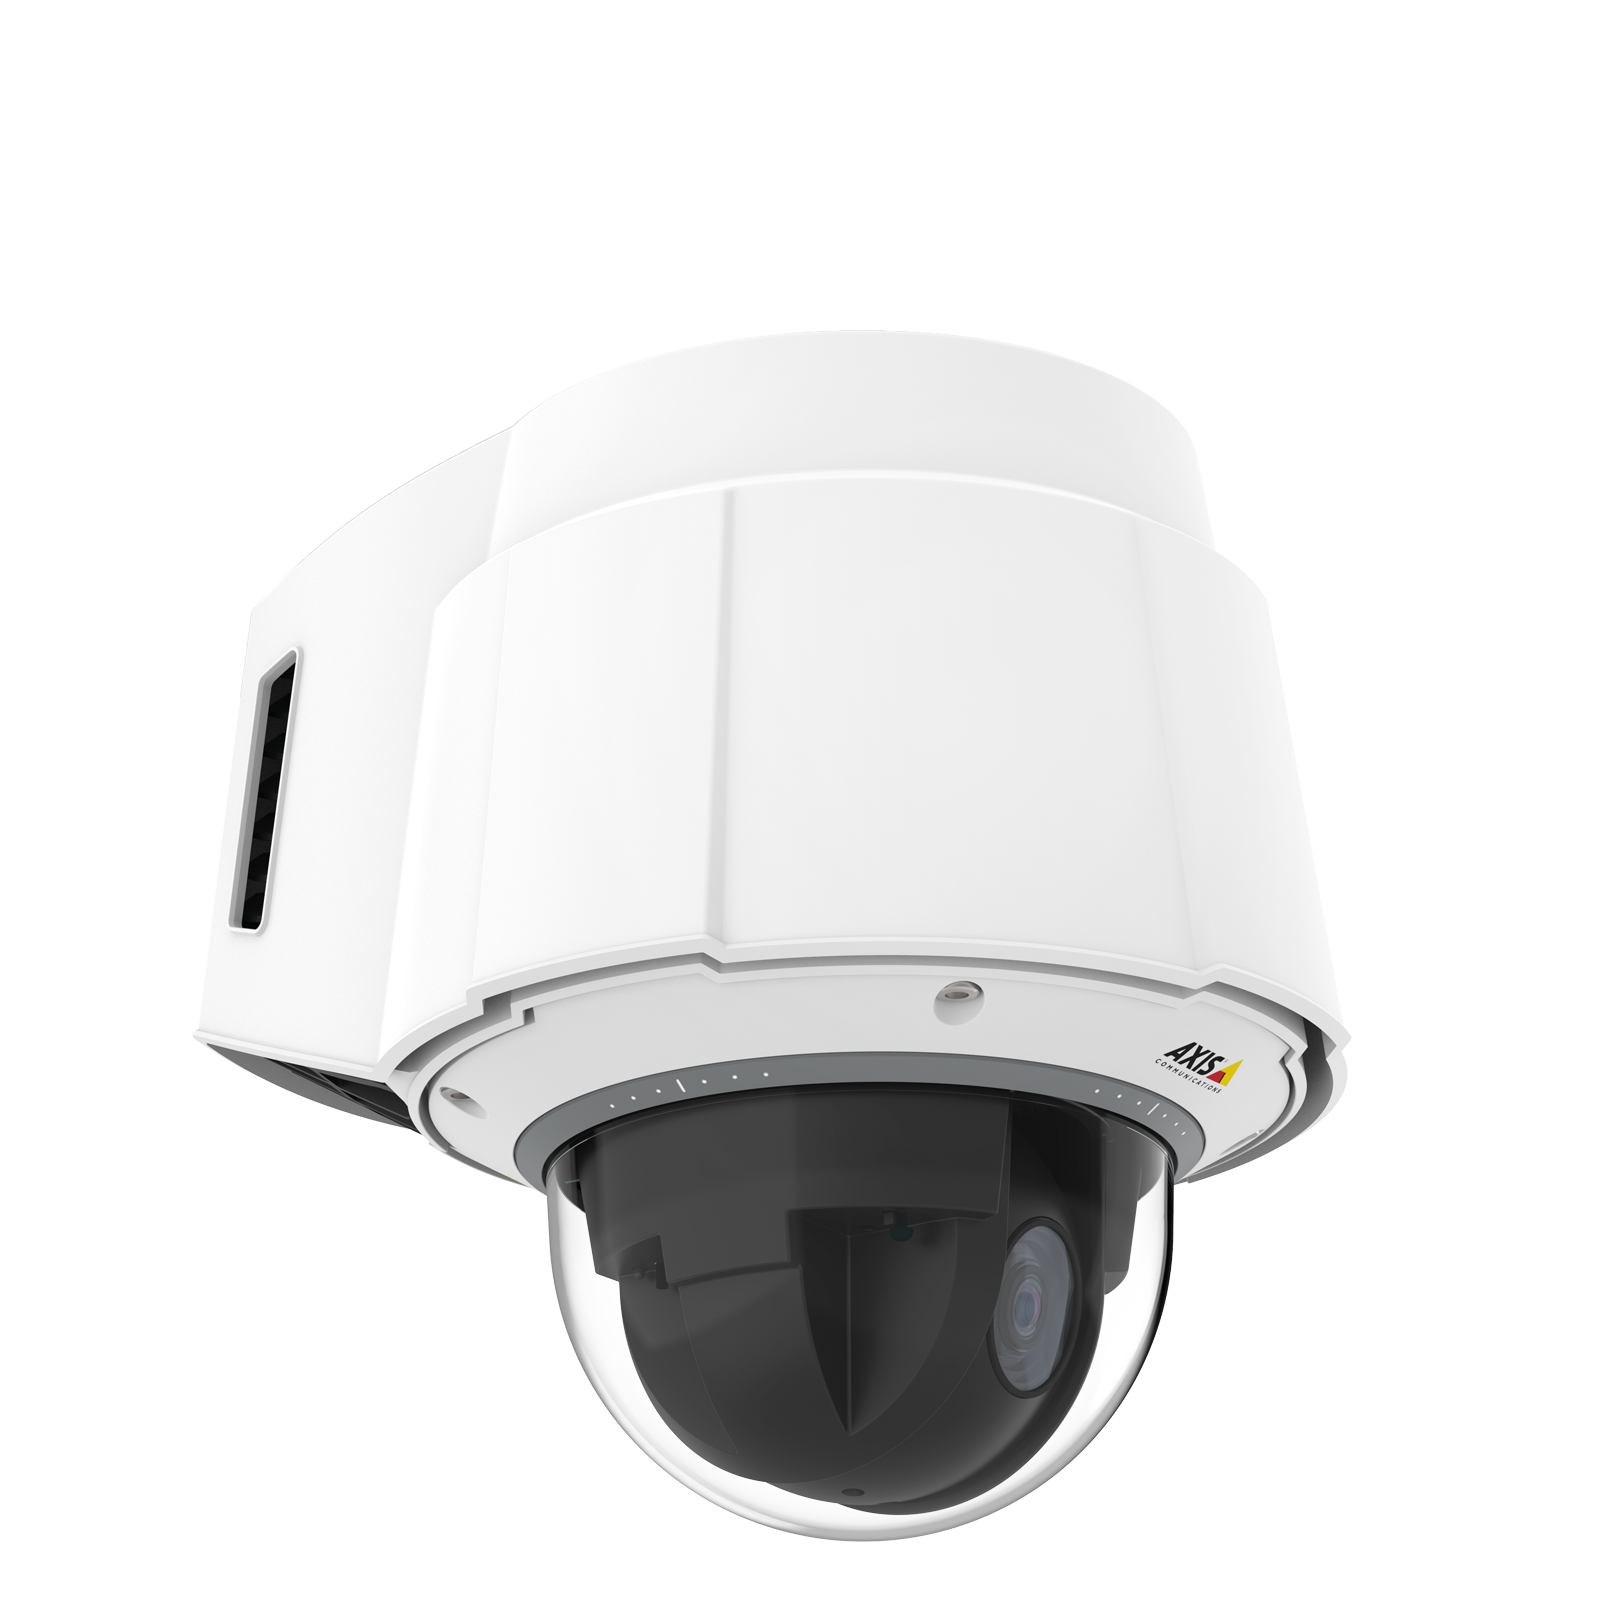 AXIS Q6055-C PTZ Network Camera | Axis Communications